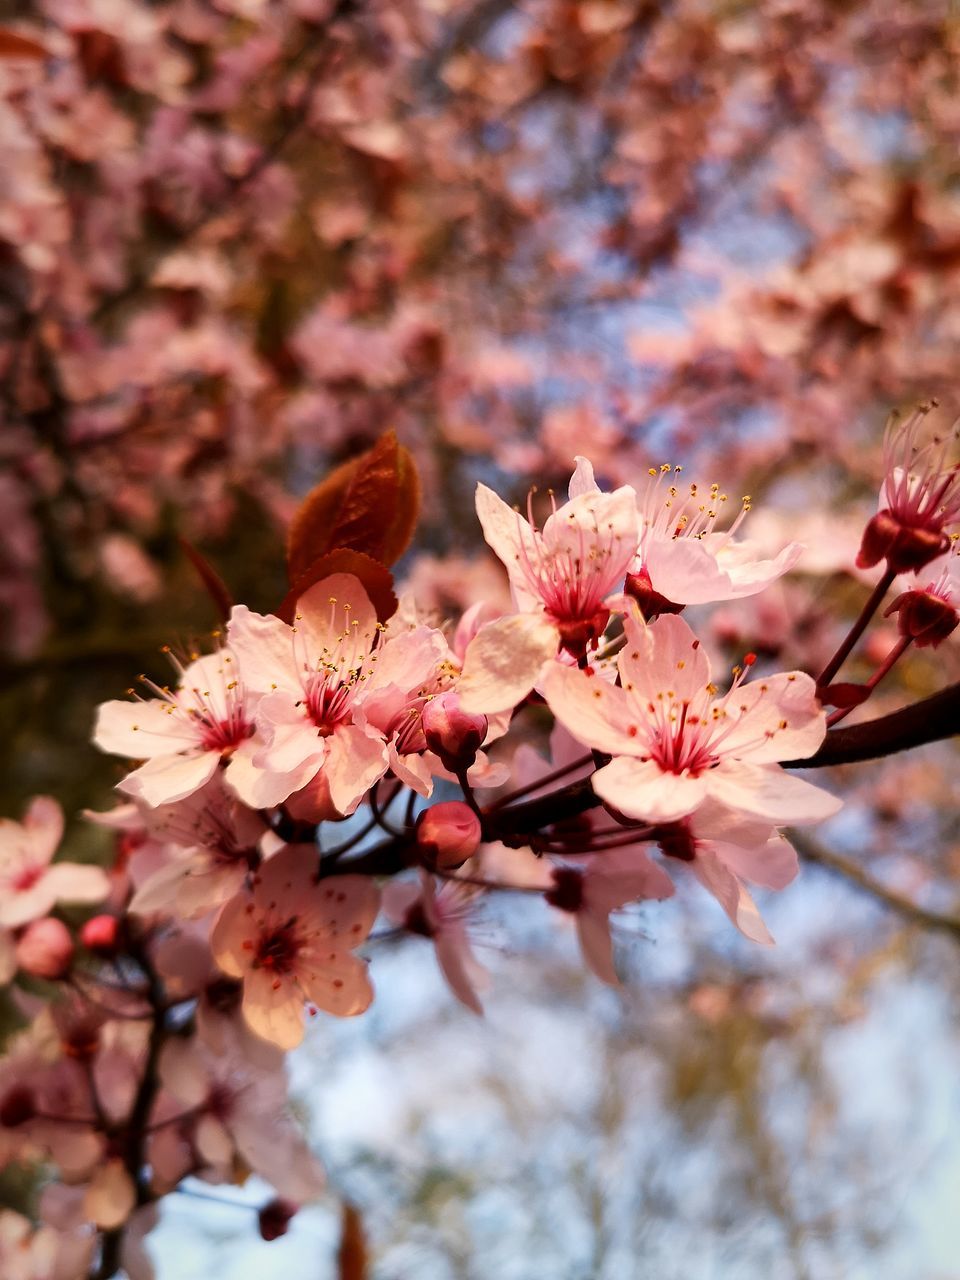 CLOSE-UP OF CHERRY BLOSSOMS ON BRANCH